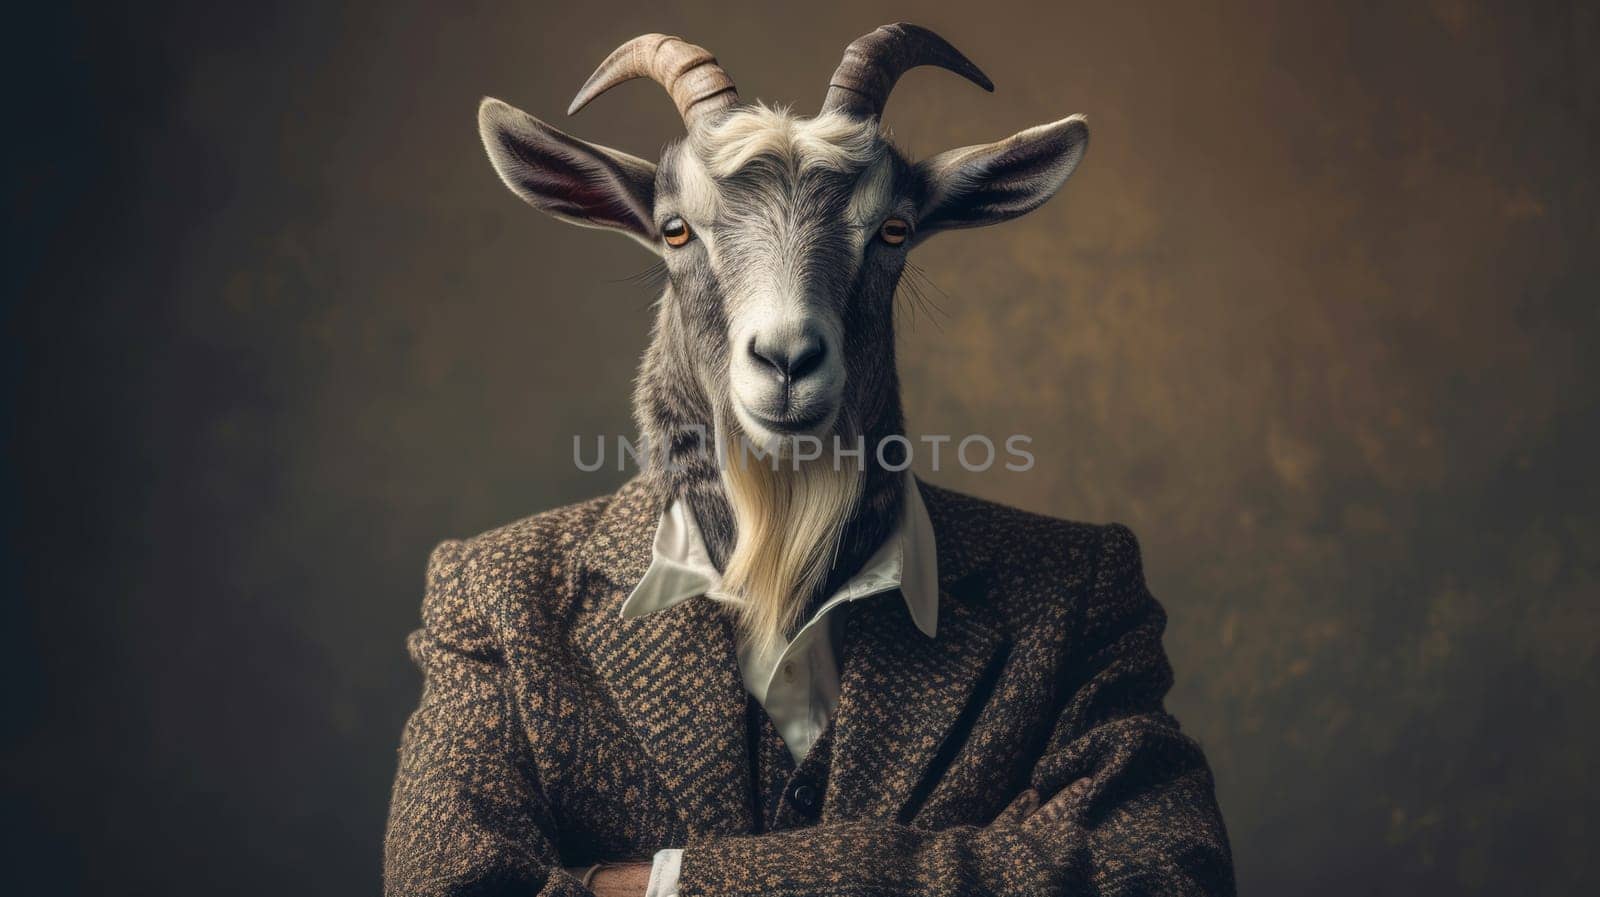 A goat wearing a suit and tie with his arms crossed, AI by starush